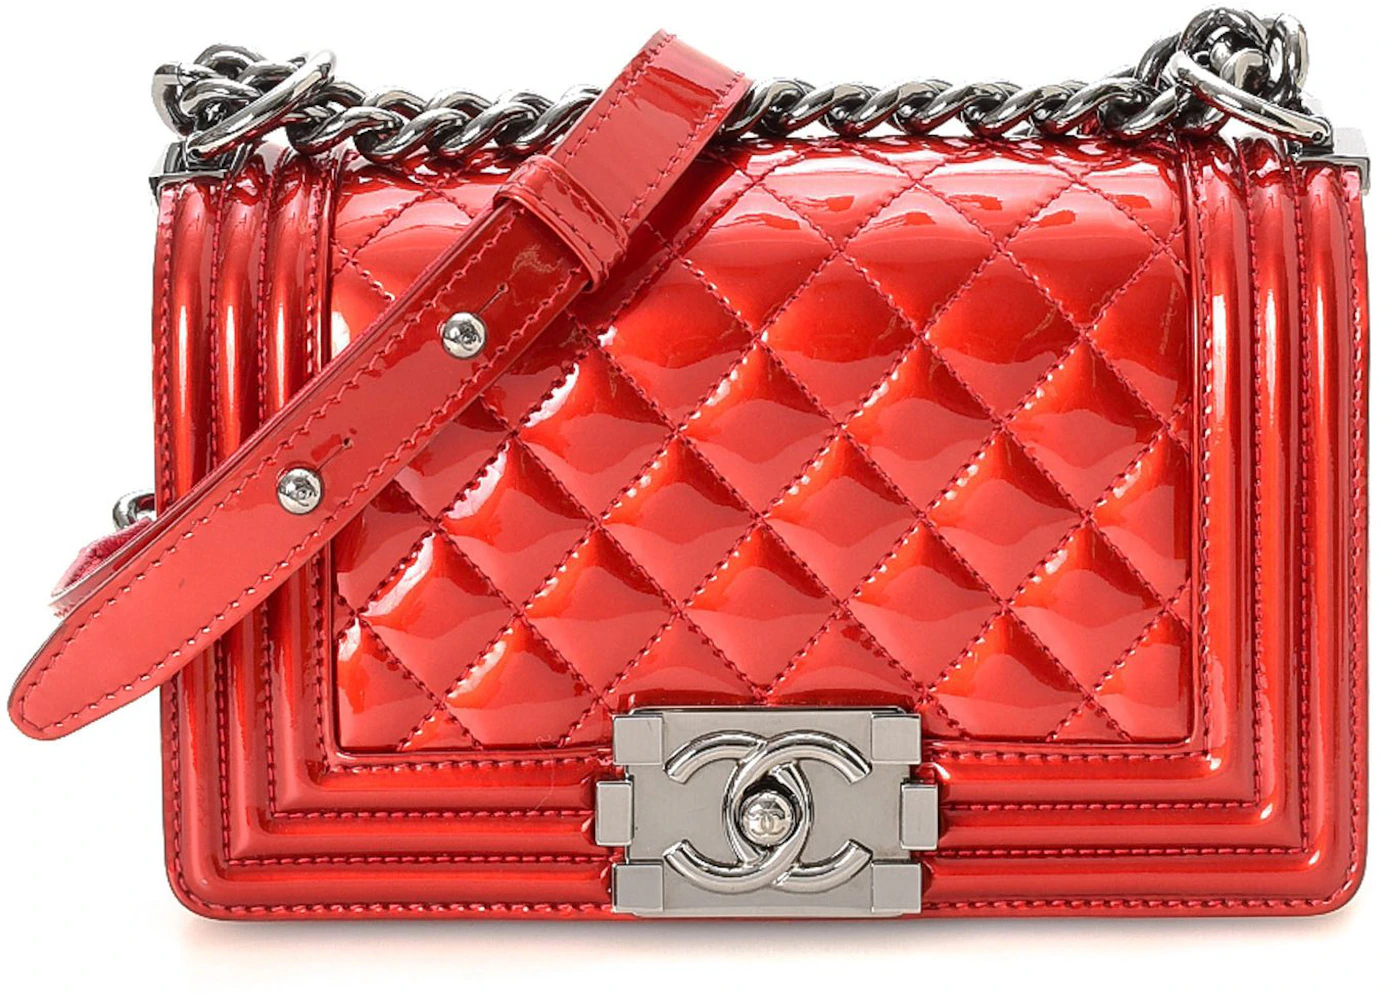 Chanel Flap Bag Small Patent Pink